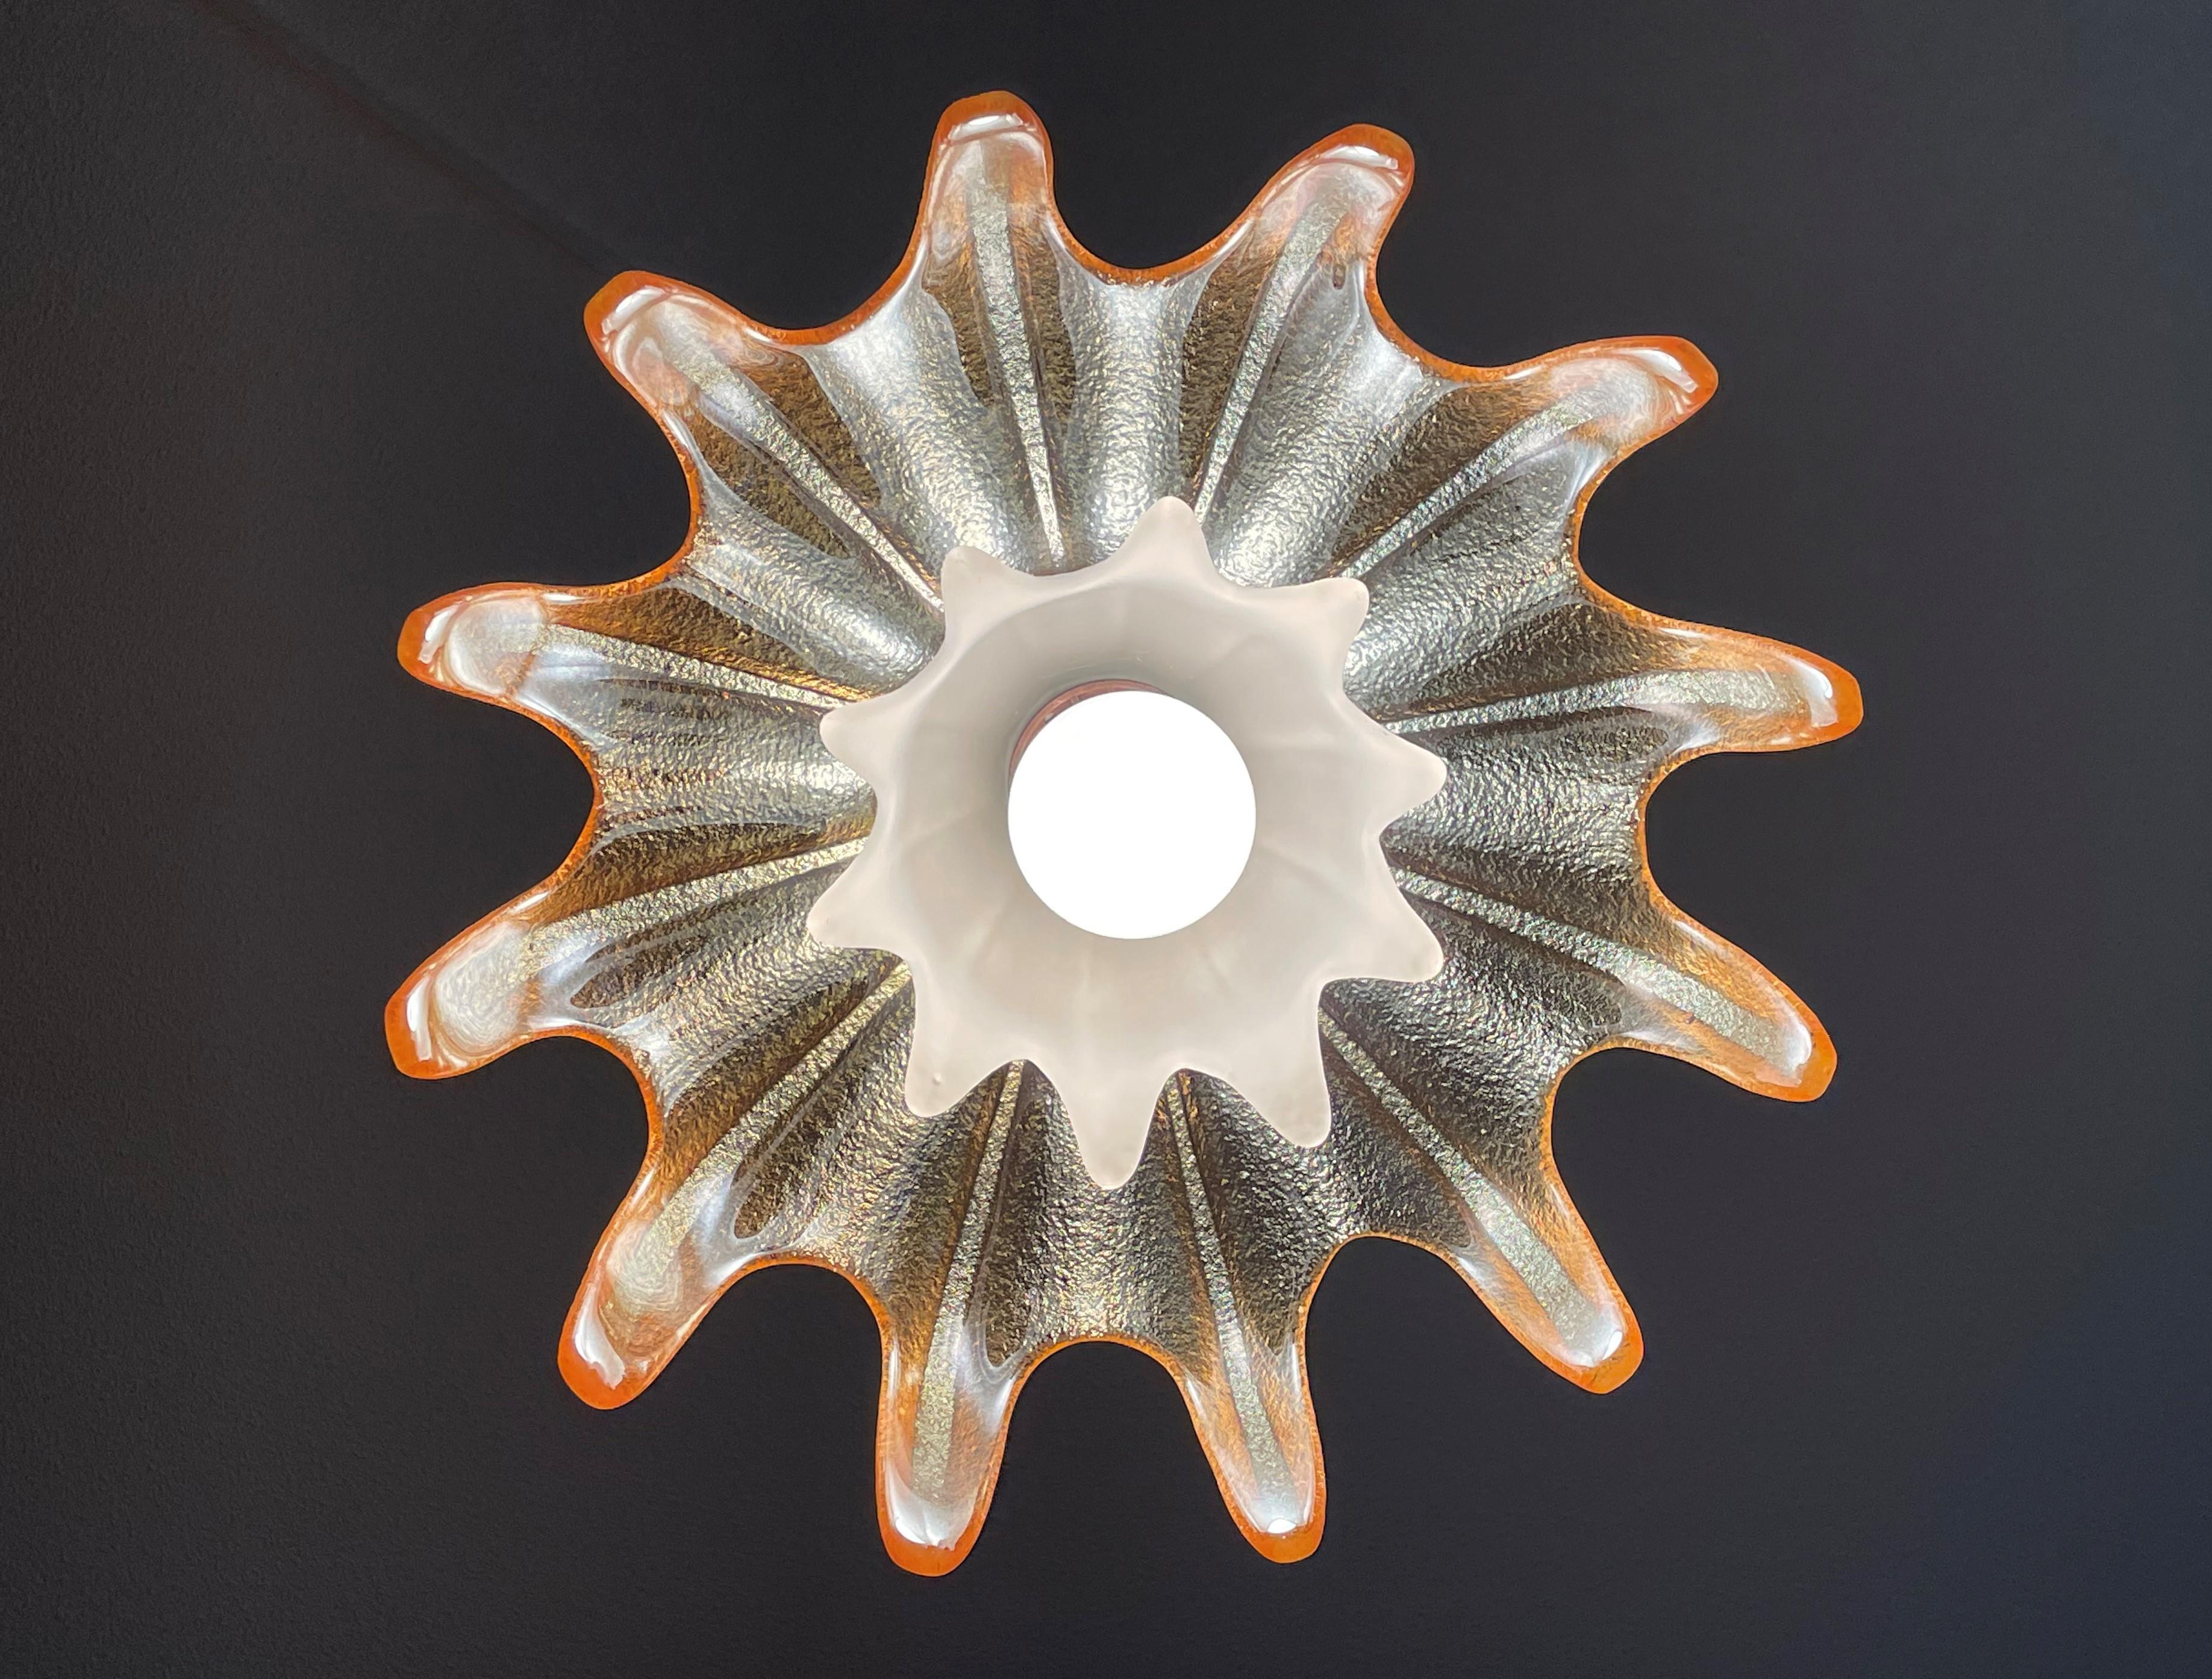 Mouth Blown Midcentury Murano Glass Pendant Attributed to Seguso Vetri d'Arte In Excellent Condition For Sale In Lisse, NL